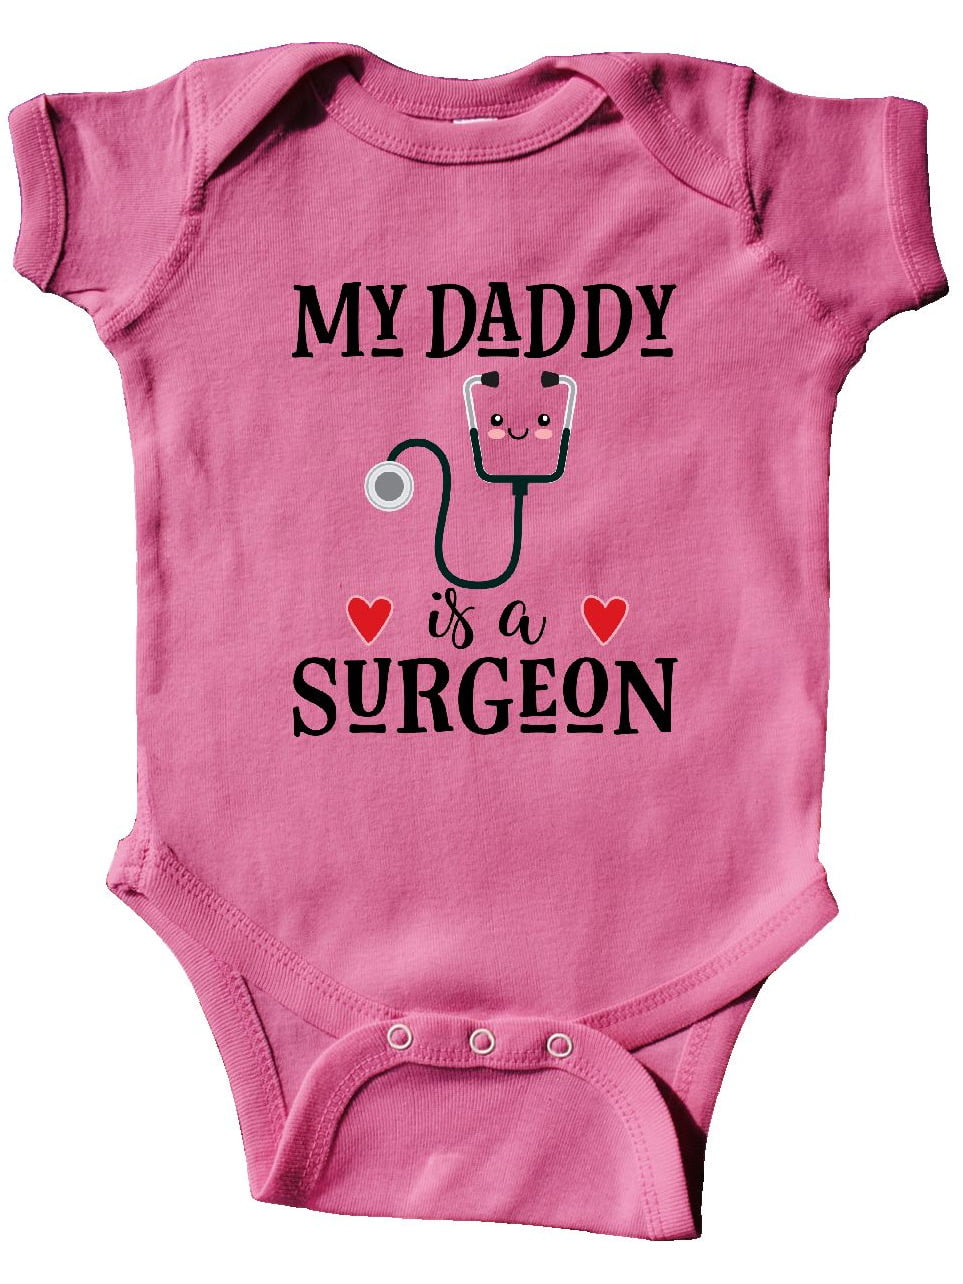 Details about  / DOCTOR WHO Baby Bodysuit Creeper New Adorable Gift